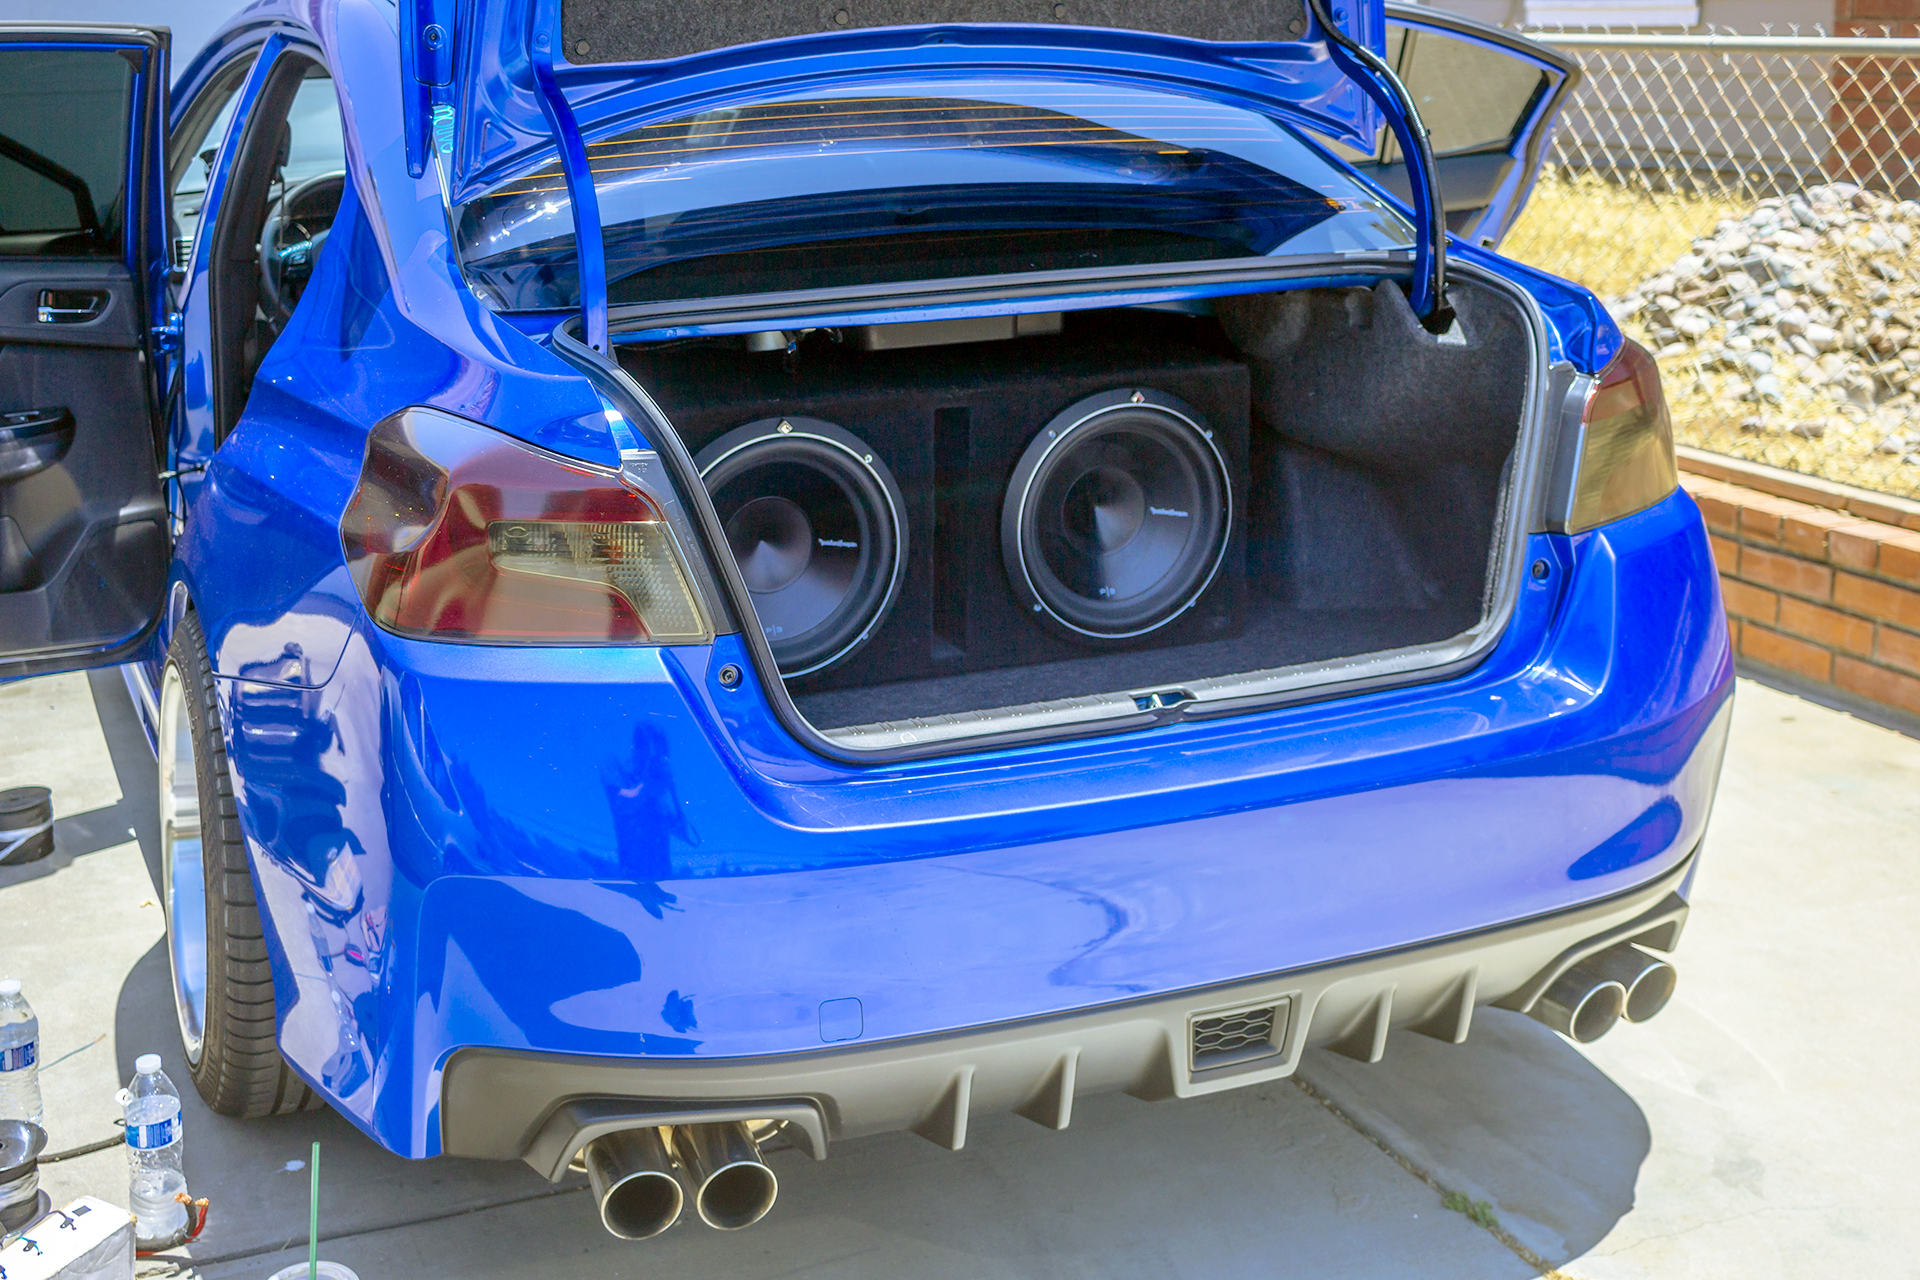 We added an amplifier and subwoofer to this 2017 Subaru WRX STI! — Twelve  Volt Technologies